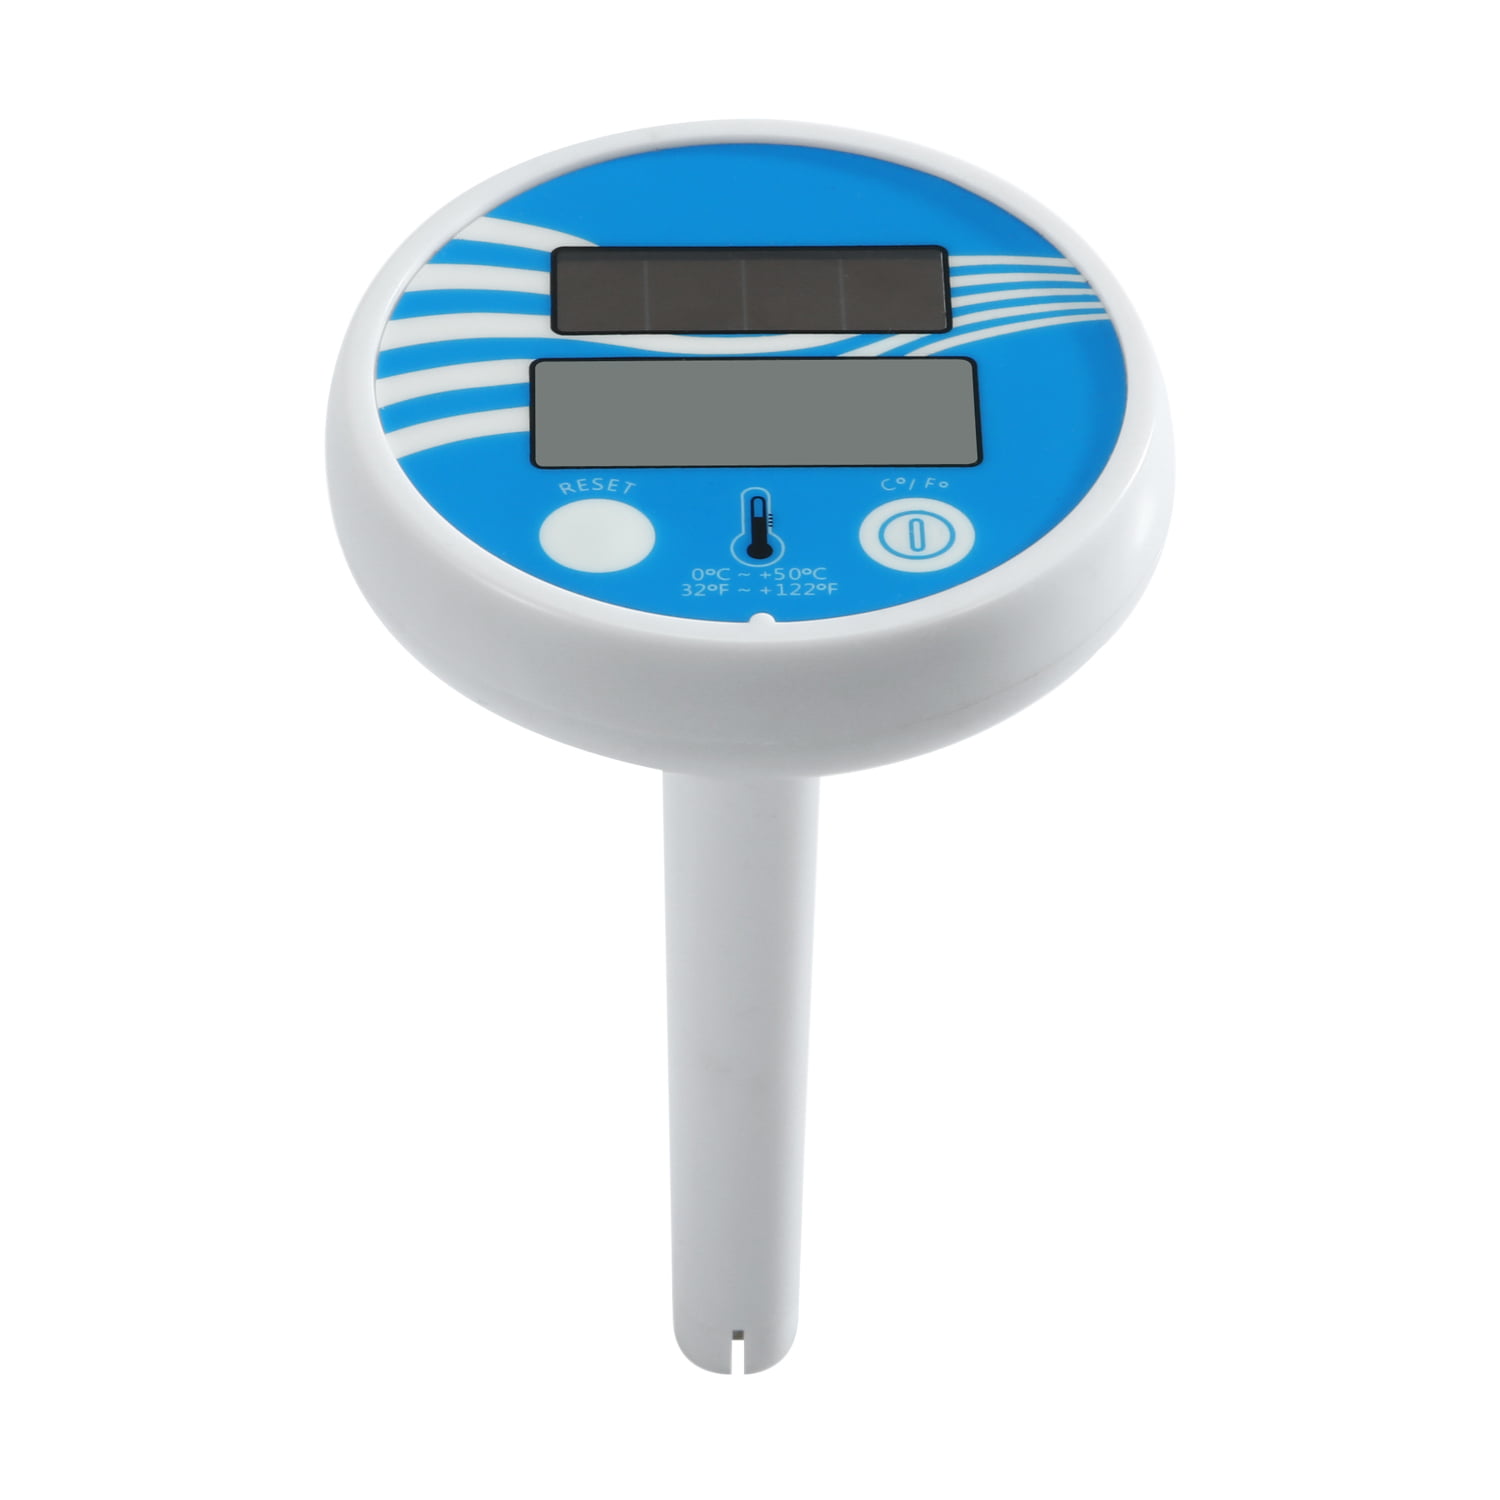 Solar Powered Digital Floating Pool & Hot Tub/ Spa Thermometer Temperature 